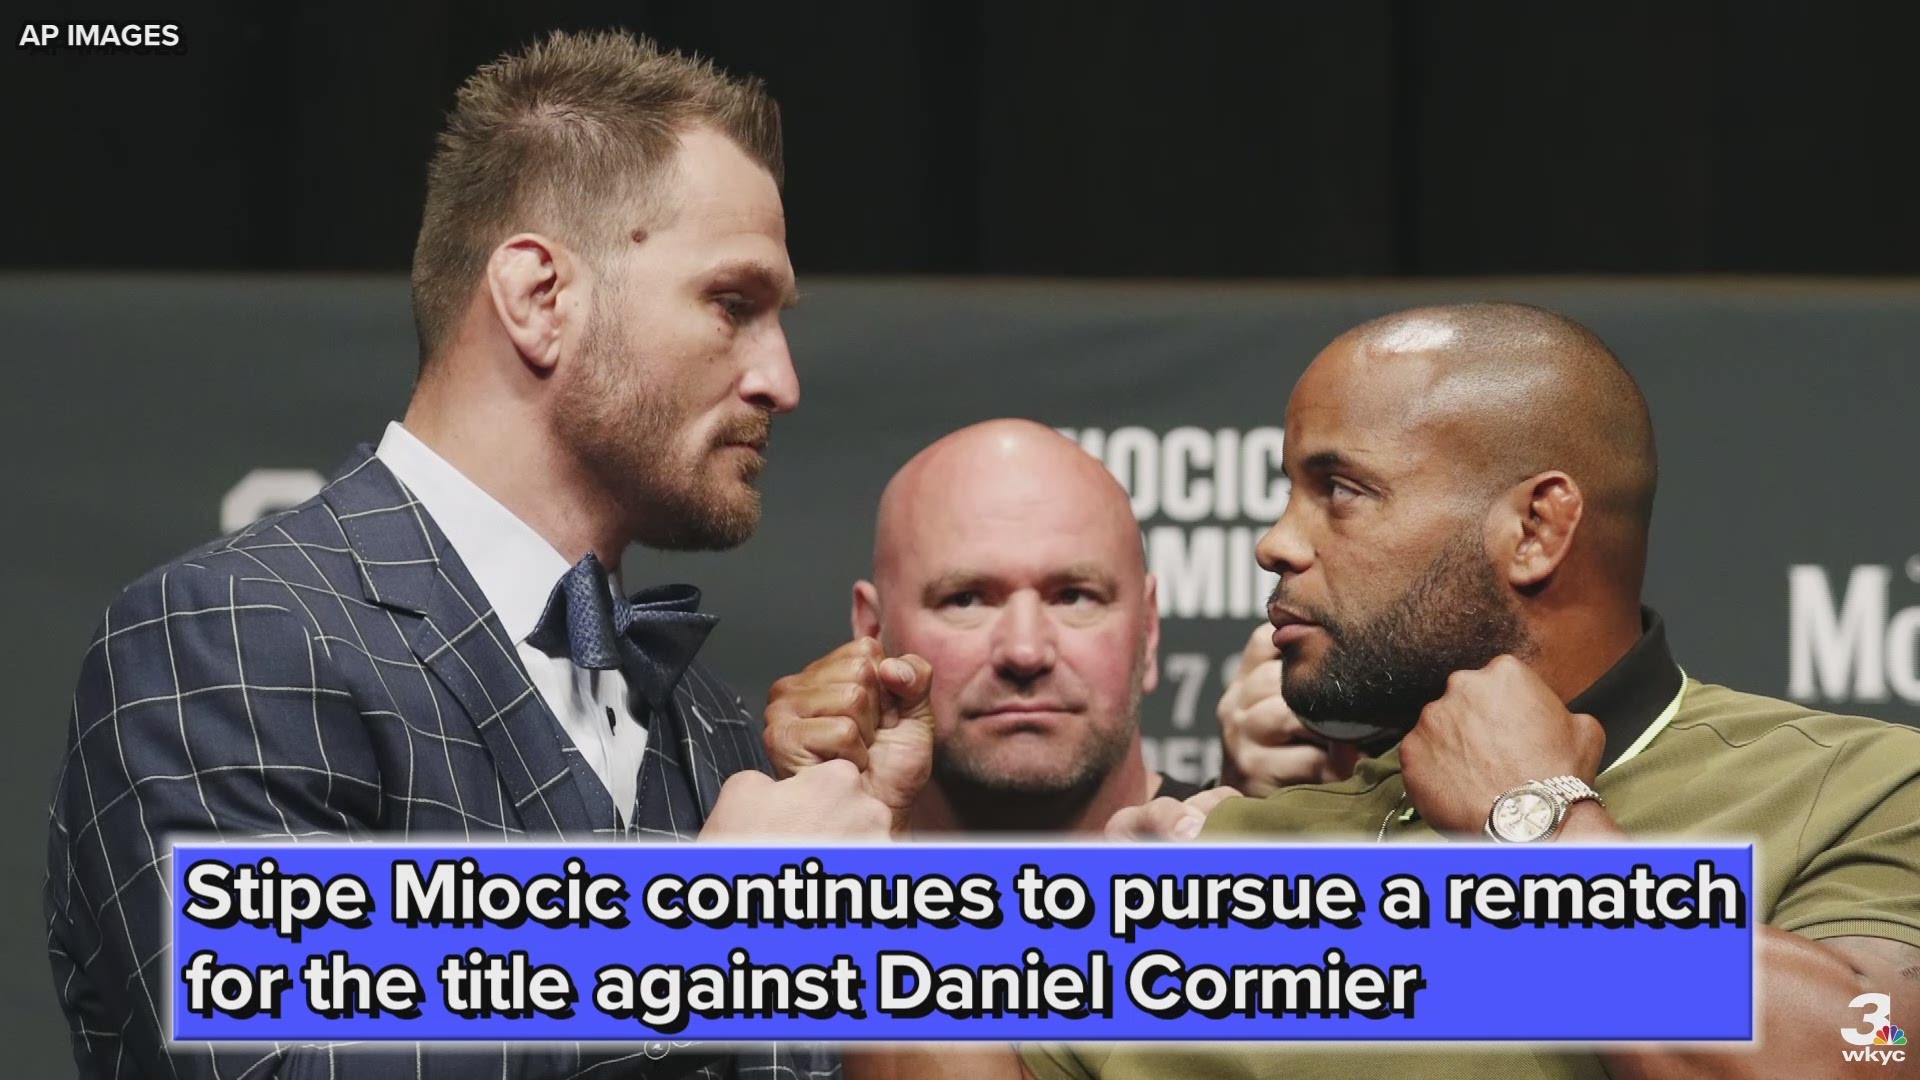 Former UFC heavyweight champion Stipe Miocic continues to pursue a rematch for the title against Daniel Cormier, pitches the idea of an April 13 bout for UFC 236.